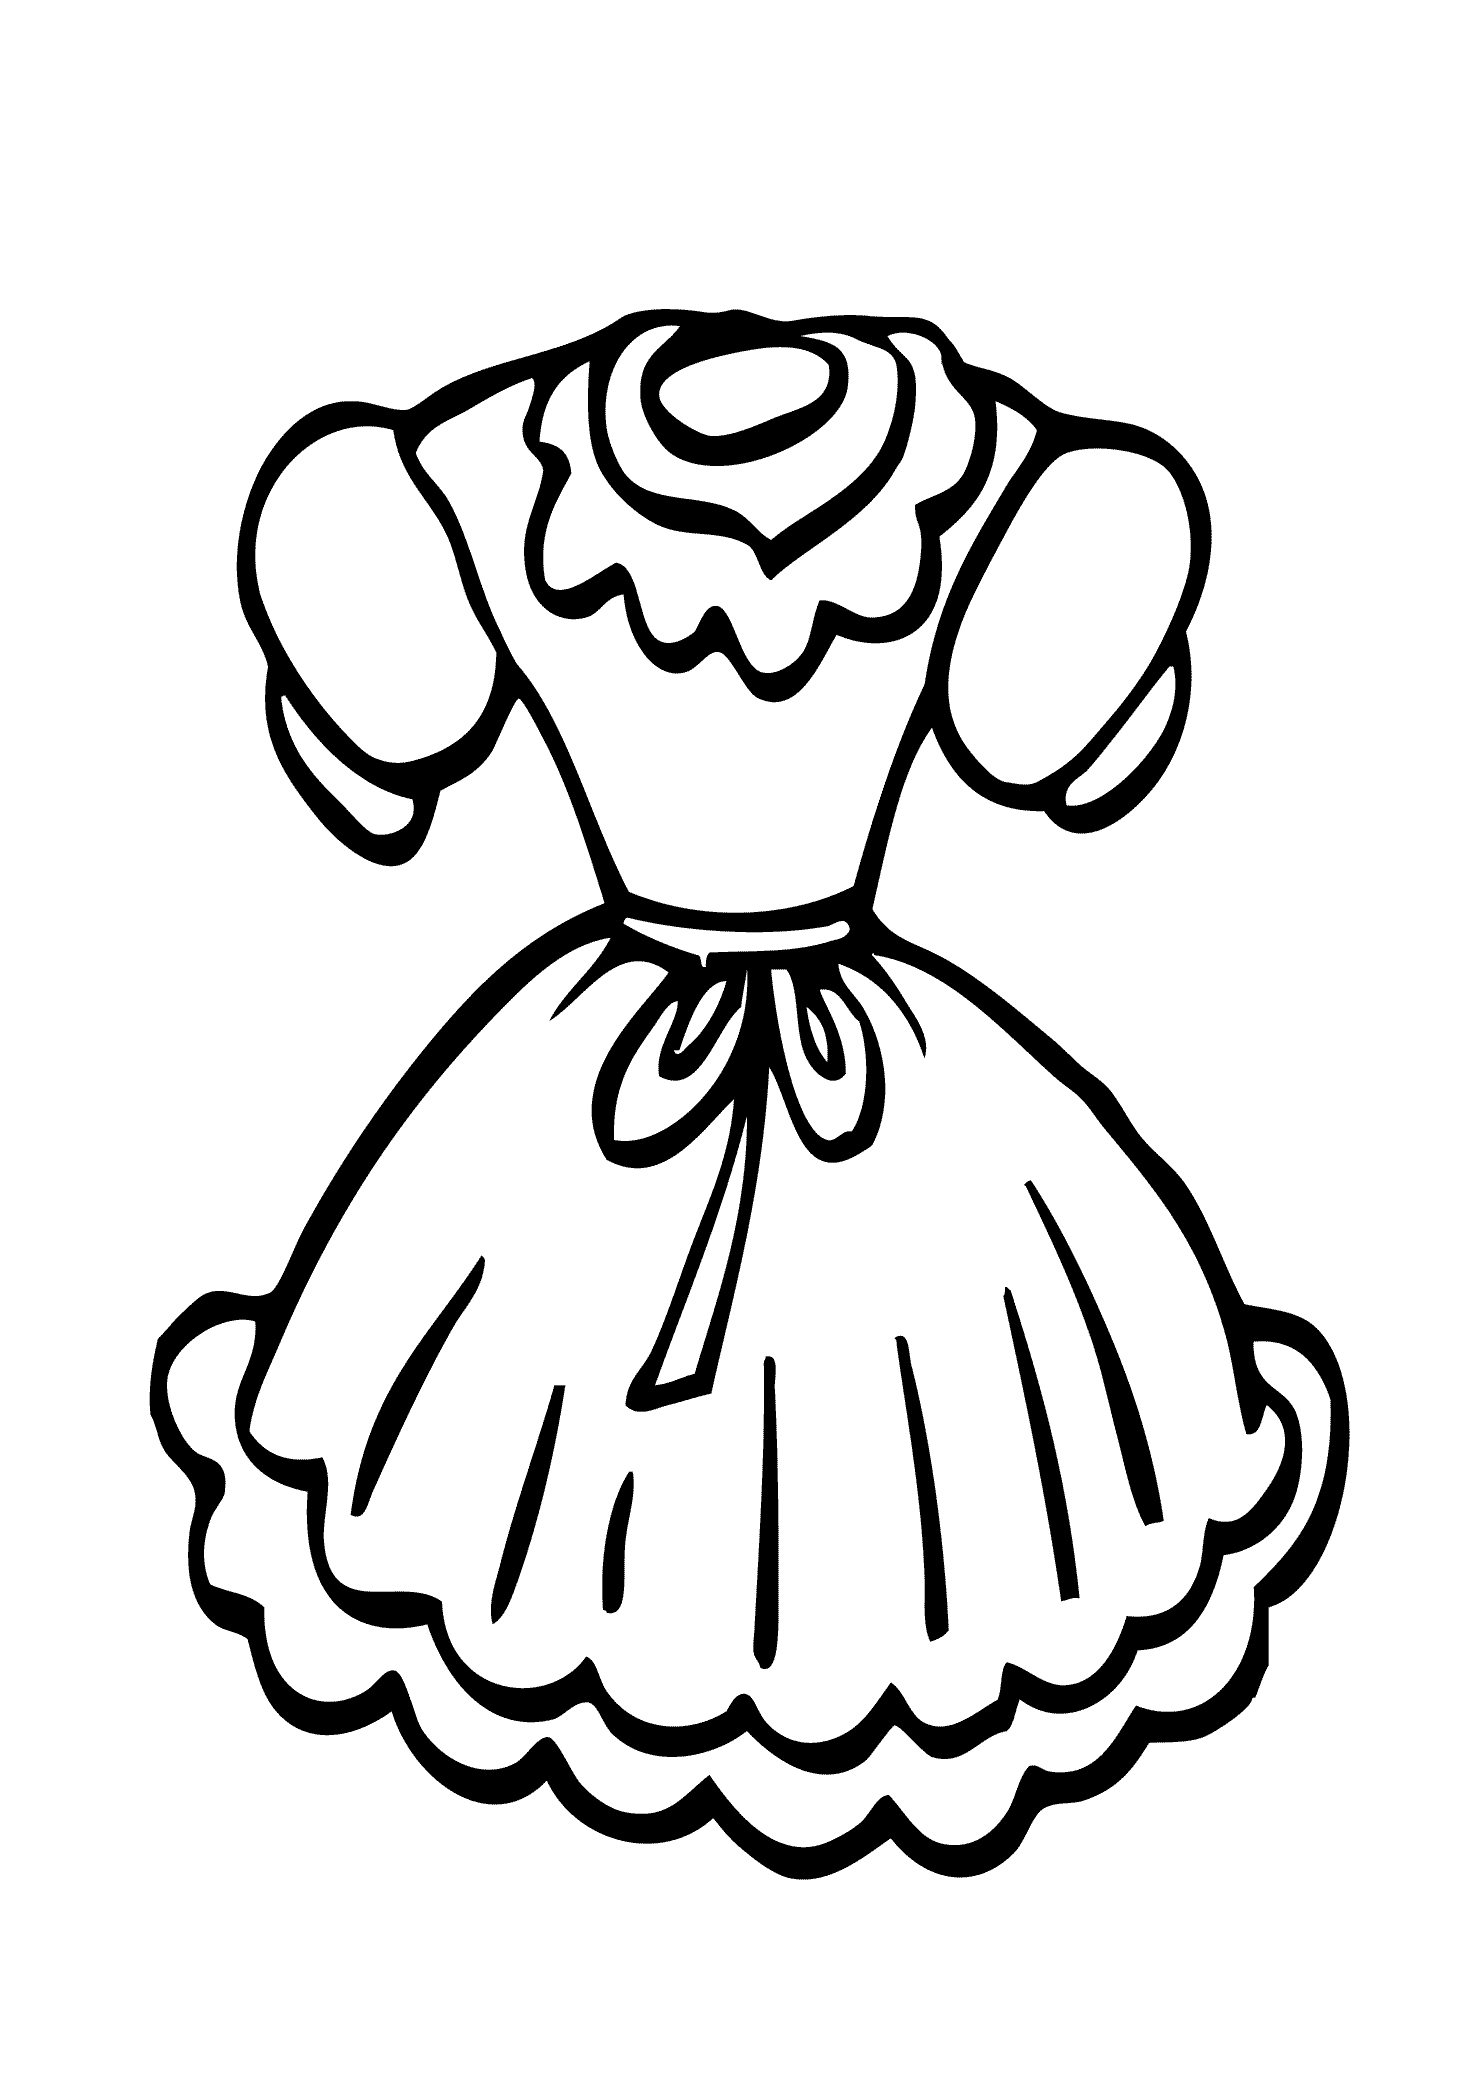 Clothes Coloring Pages For Girls | Coloring Pages For All Ages